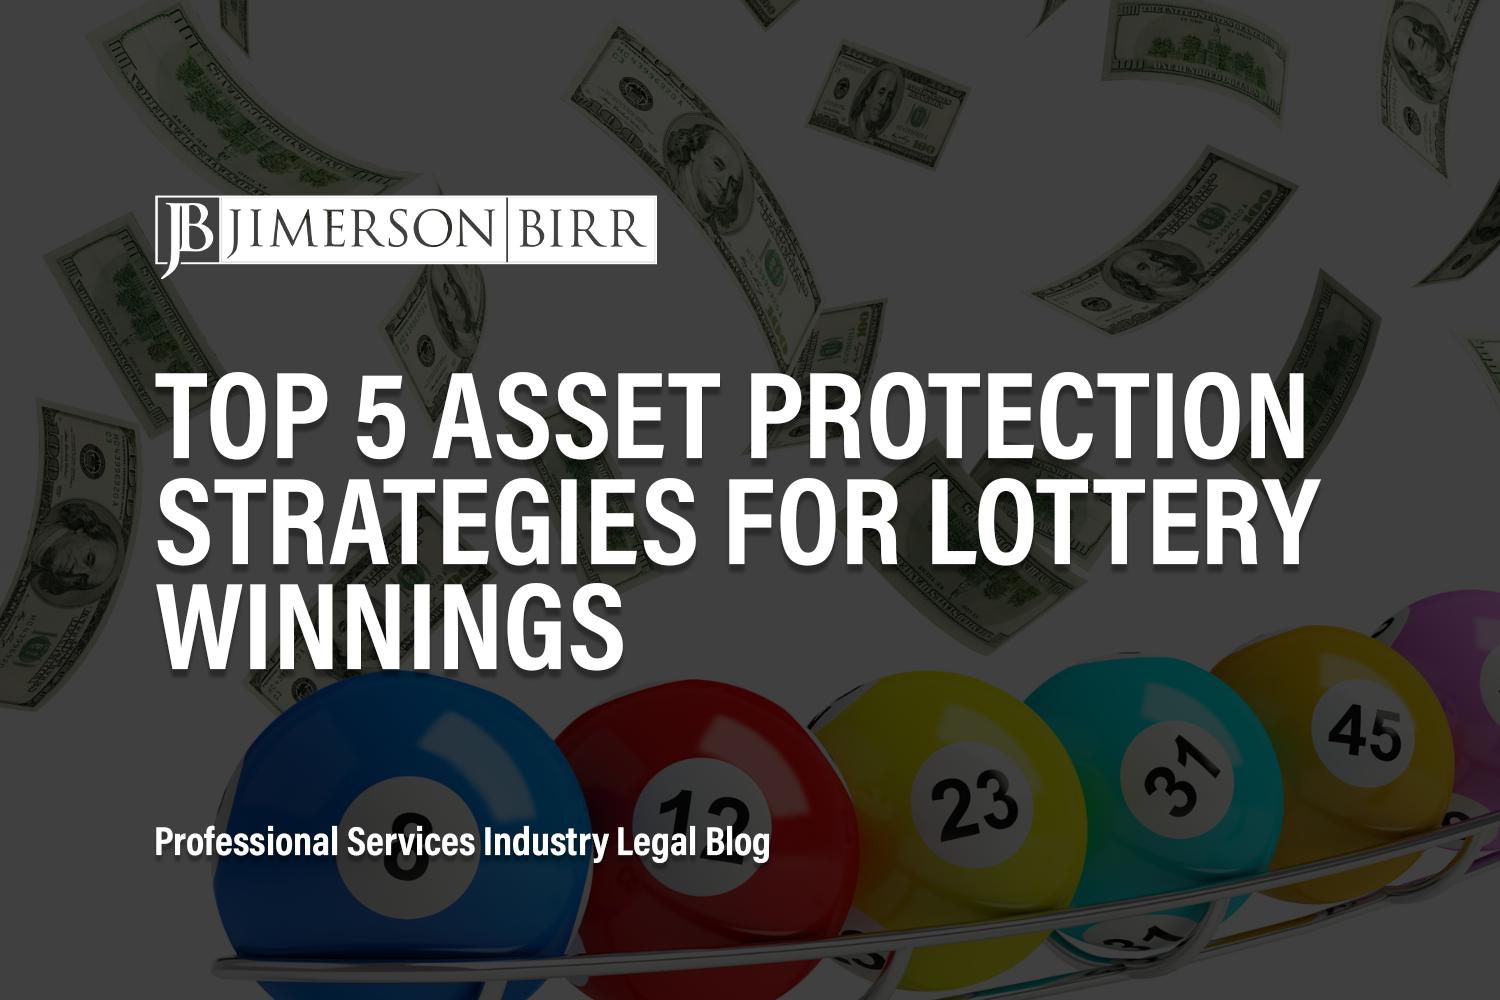 Top 5 Asset Protection Strategies for Lottery Winnings